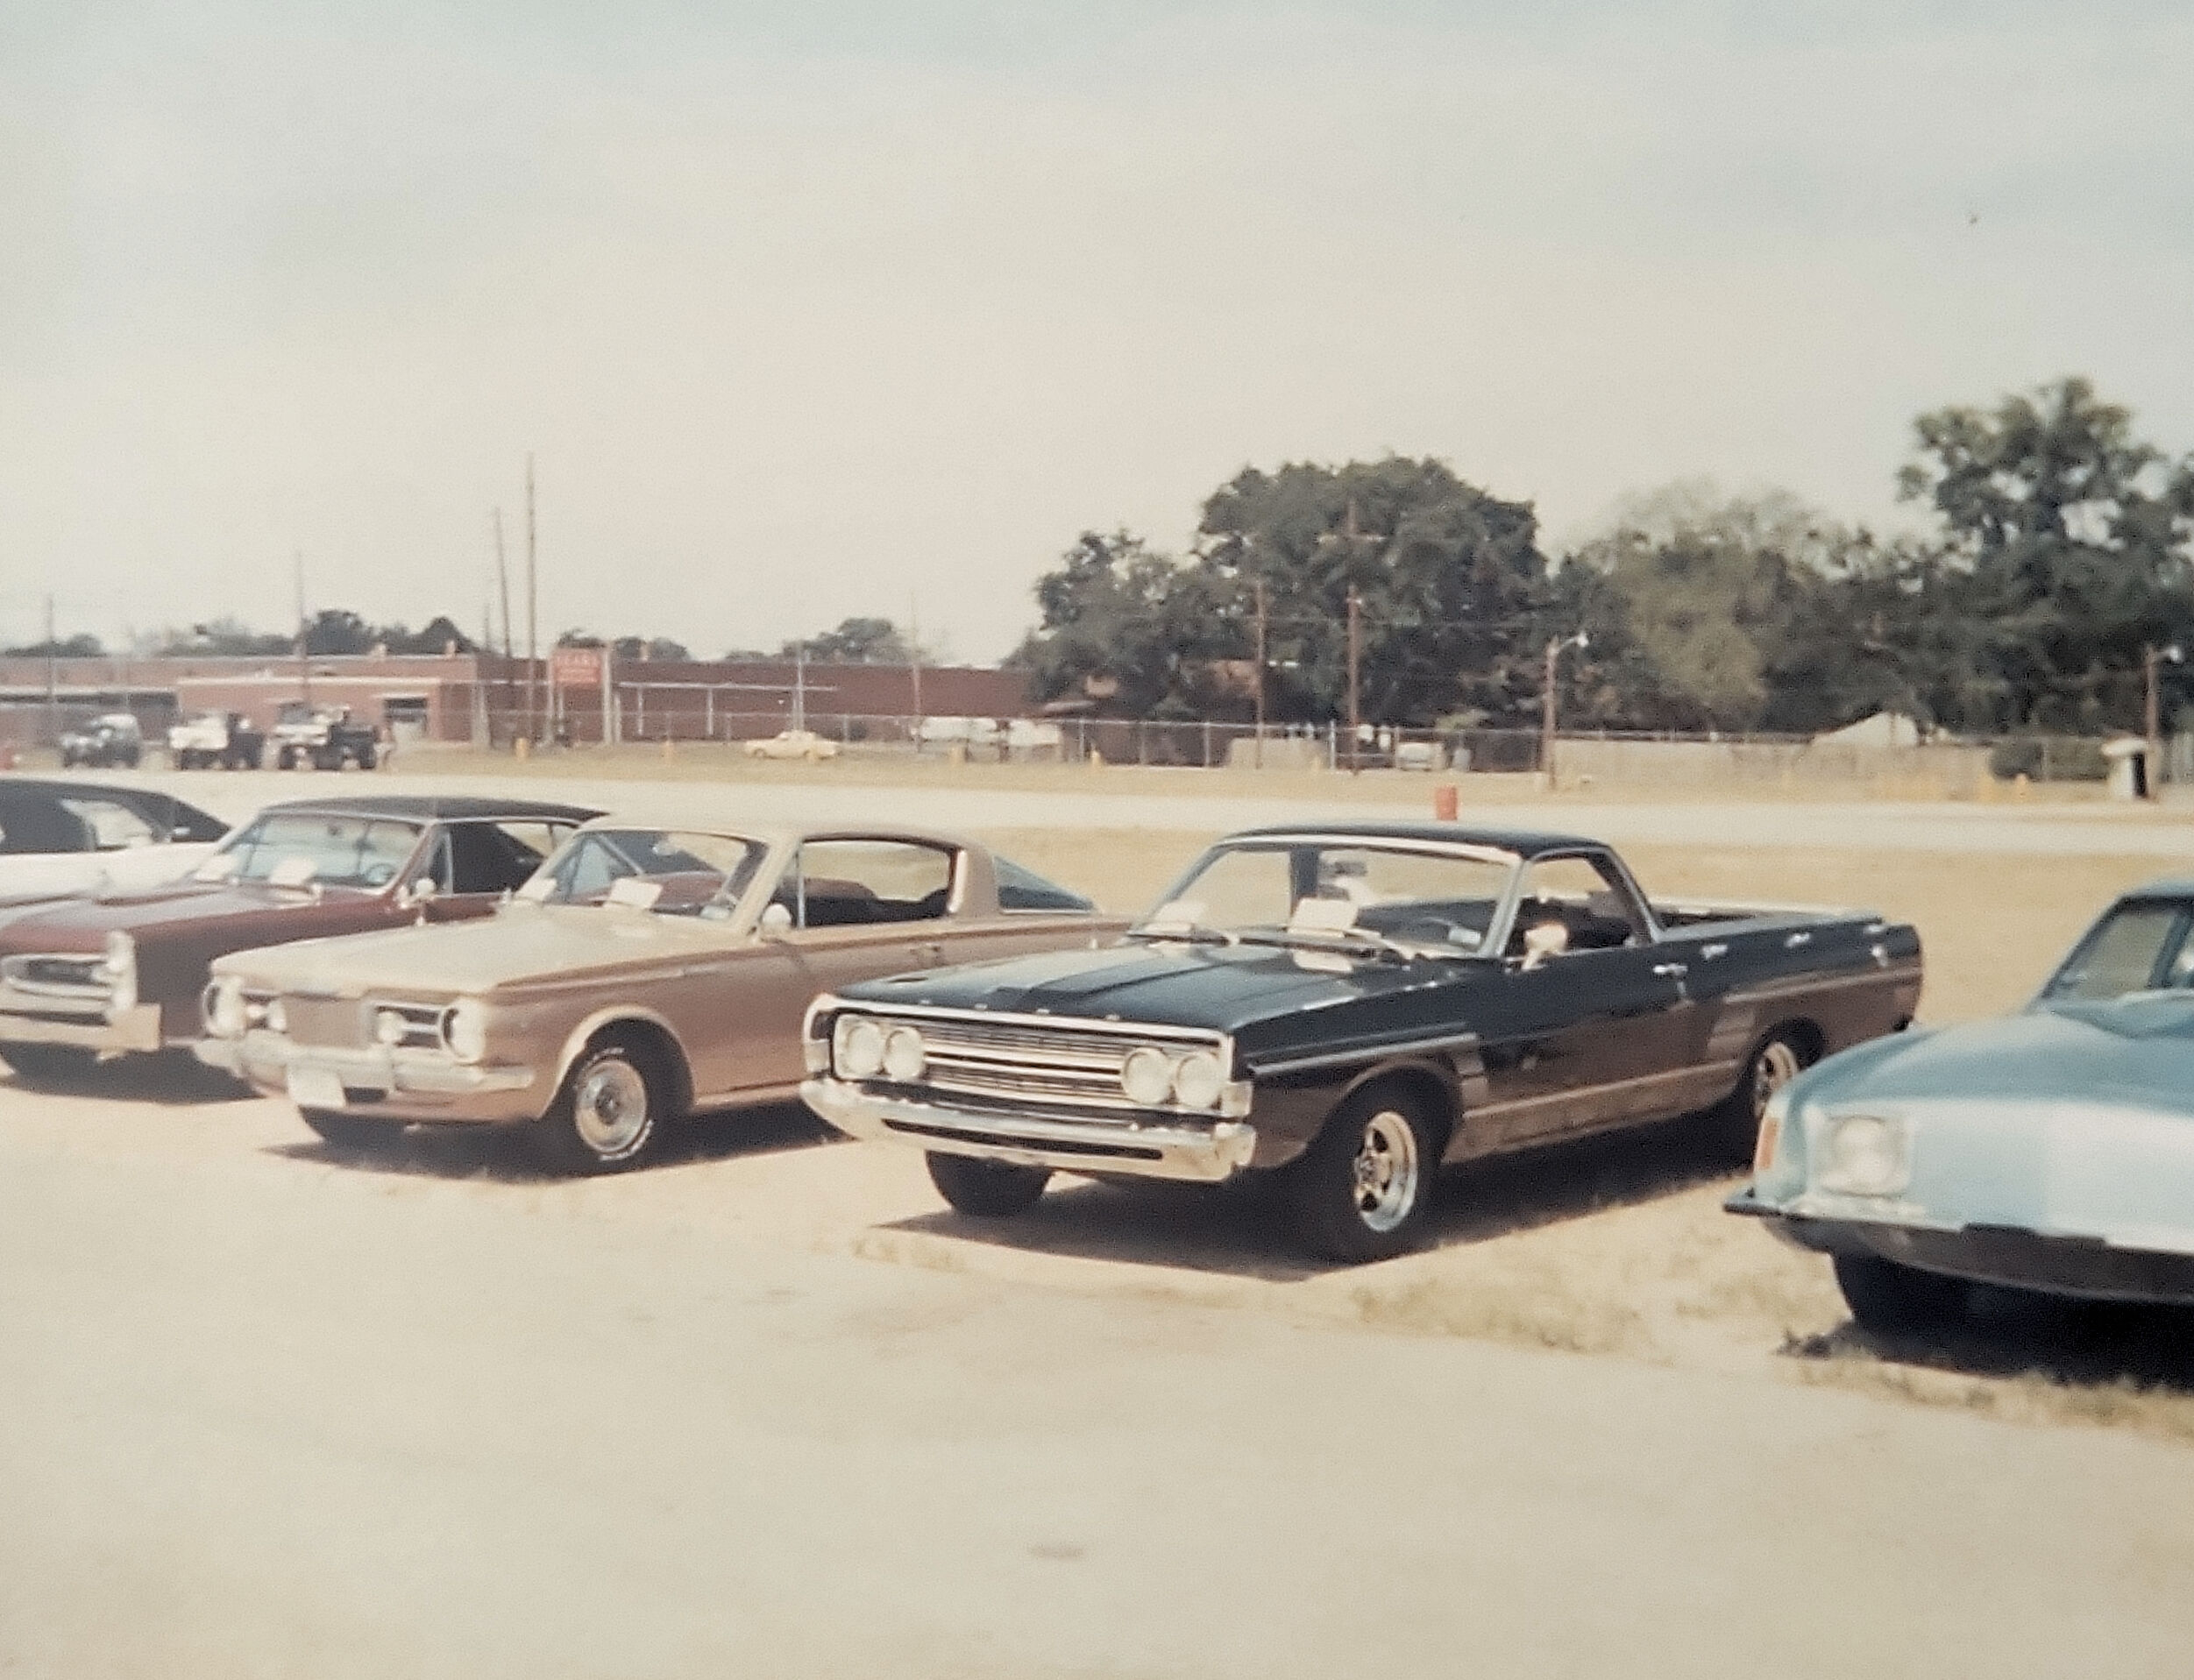 1968 Ford Ranchero next to our 1965 Barracuda. State Fairgrounds mid 80's

